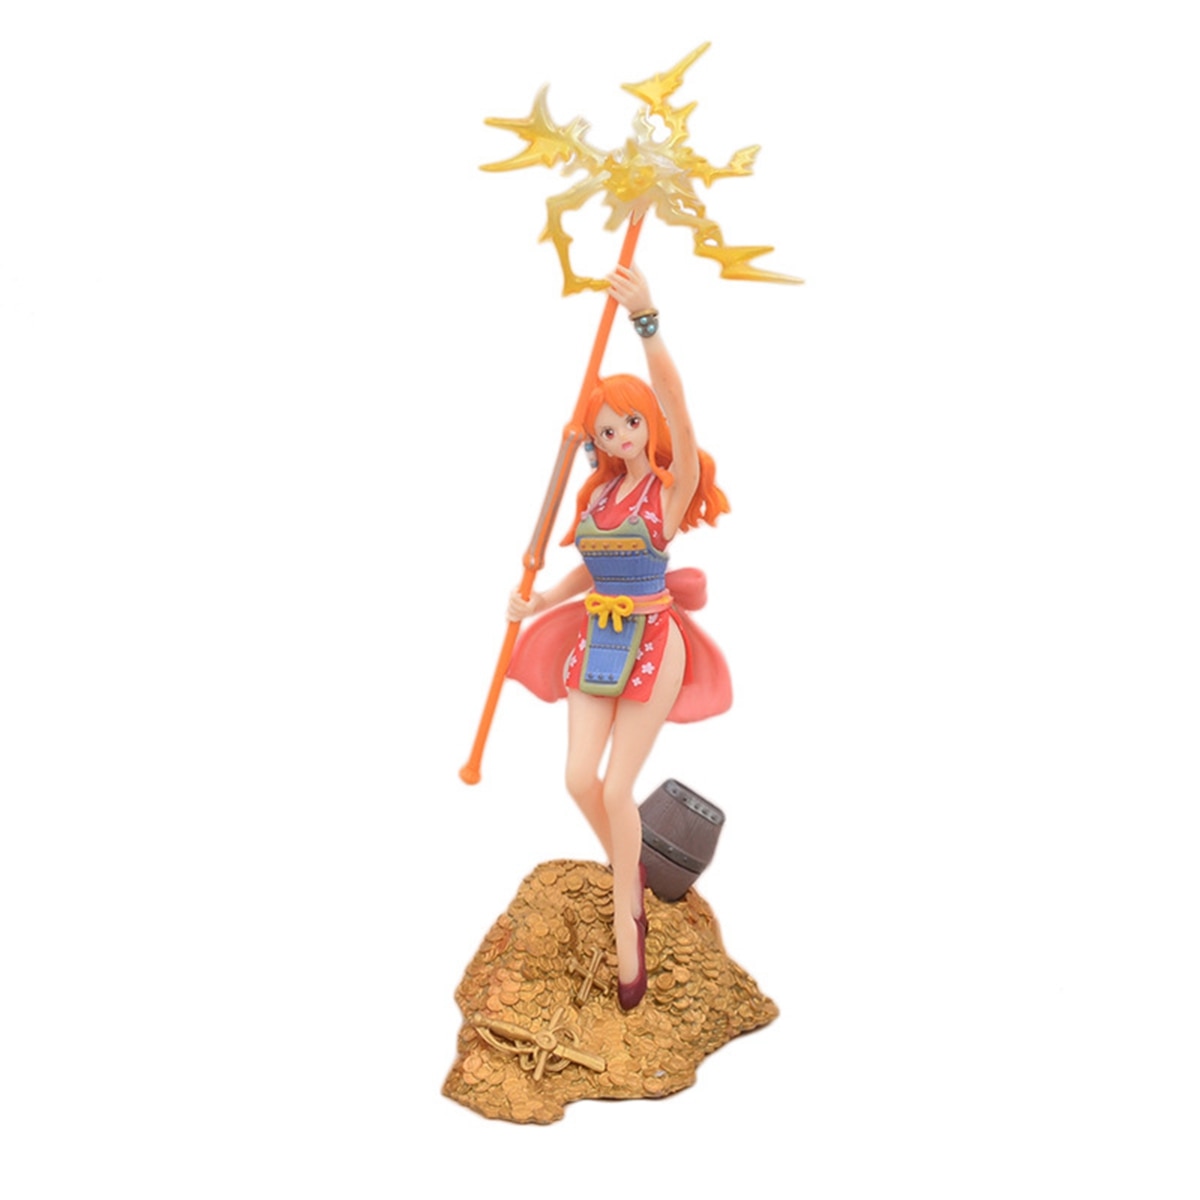 Anime One Piece Nami Figure Diva Stick Model Toy Gift Collection 23CM Luffy Action Figure Collection 5 - One Piece Store